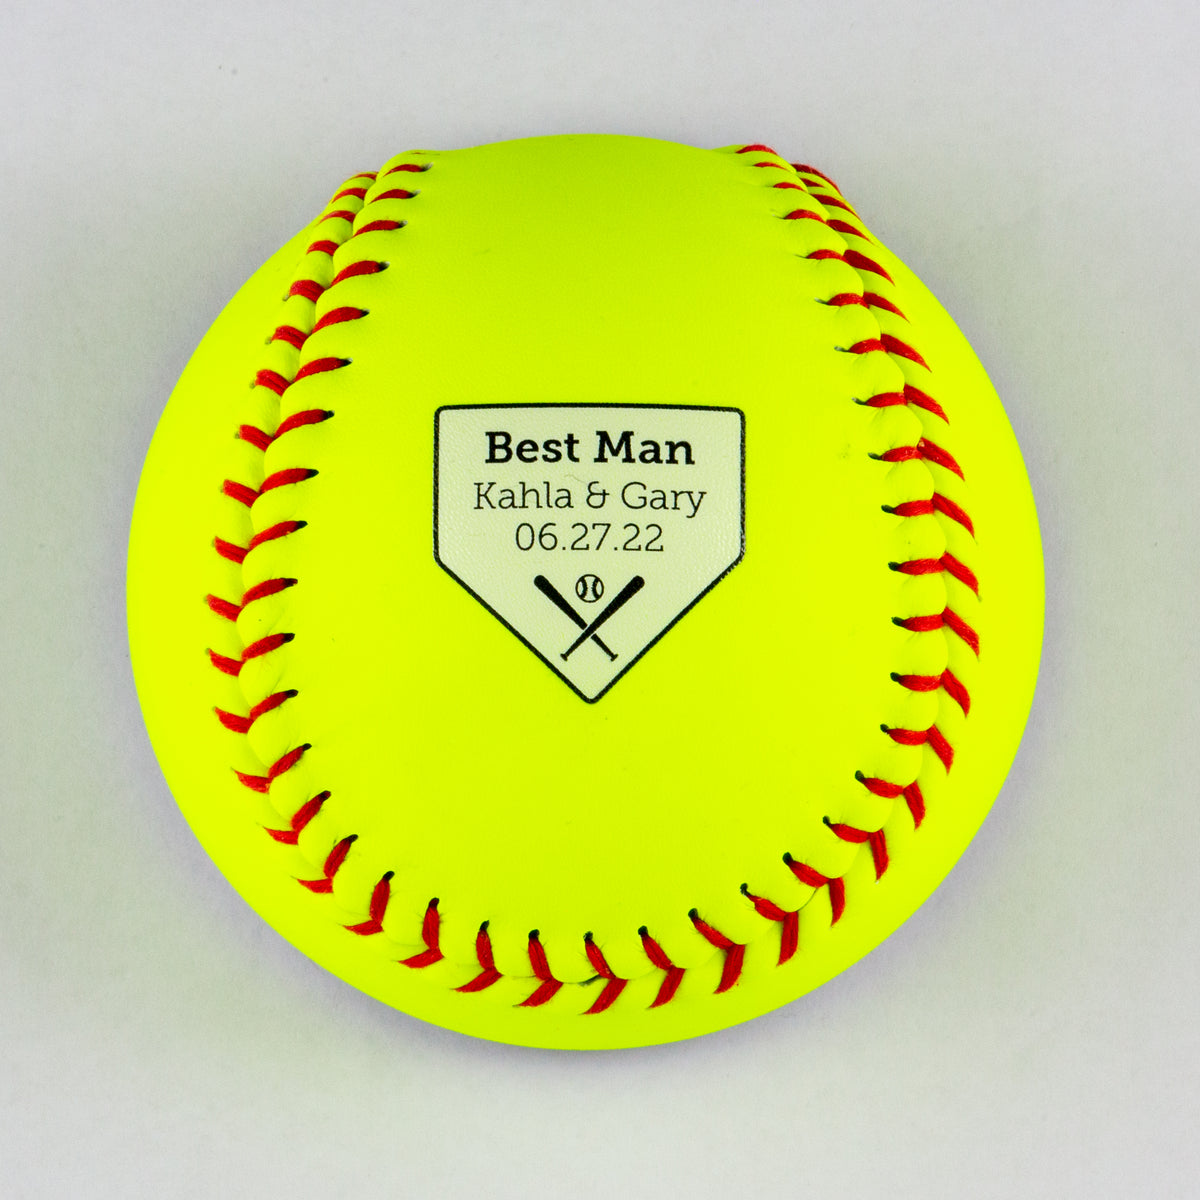 Softball Opener with Home Plate, Couple Names, Wedding Party Role, Wedding Date Design